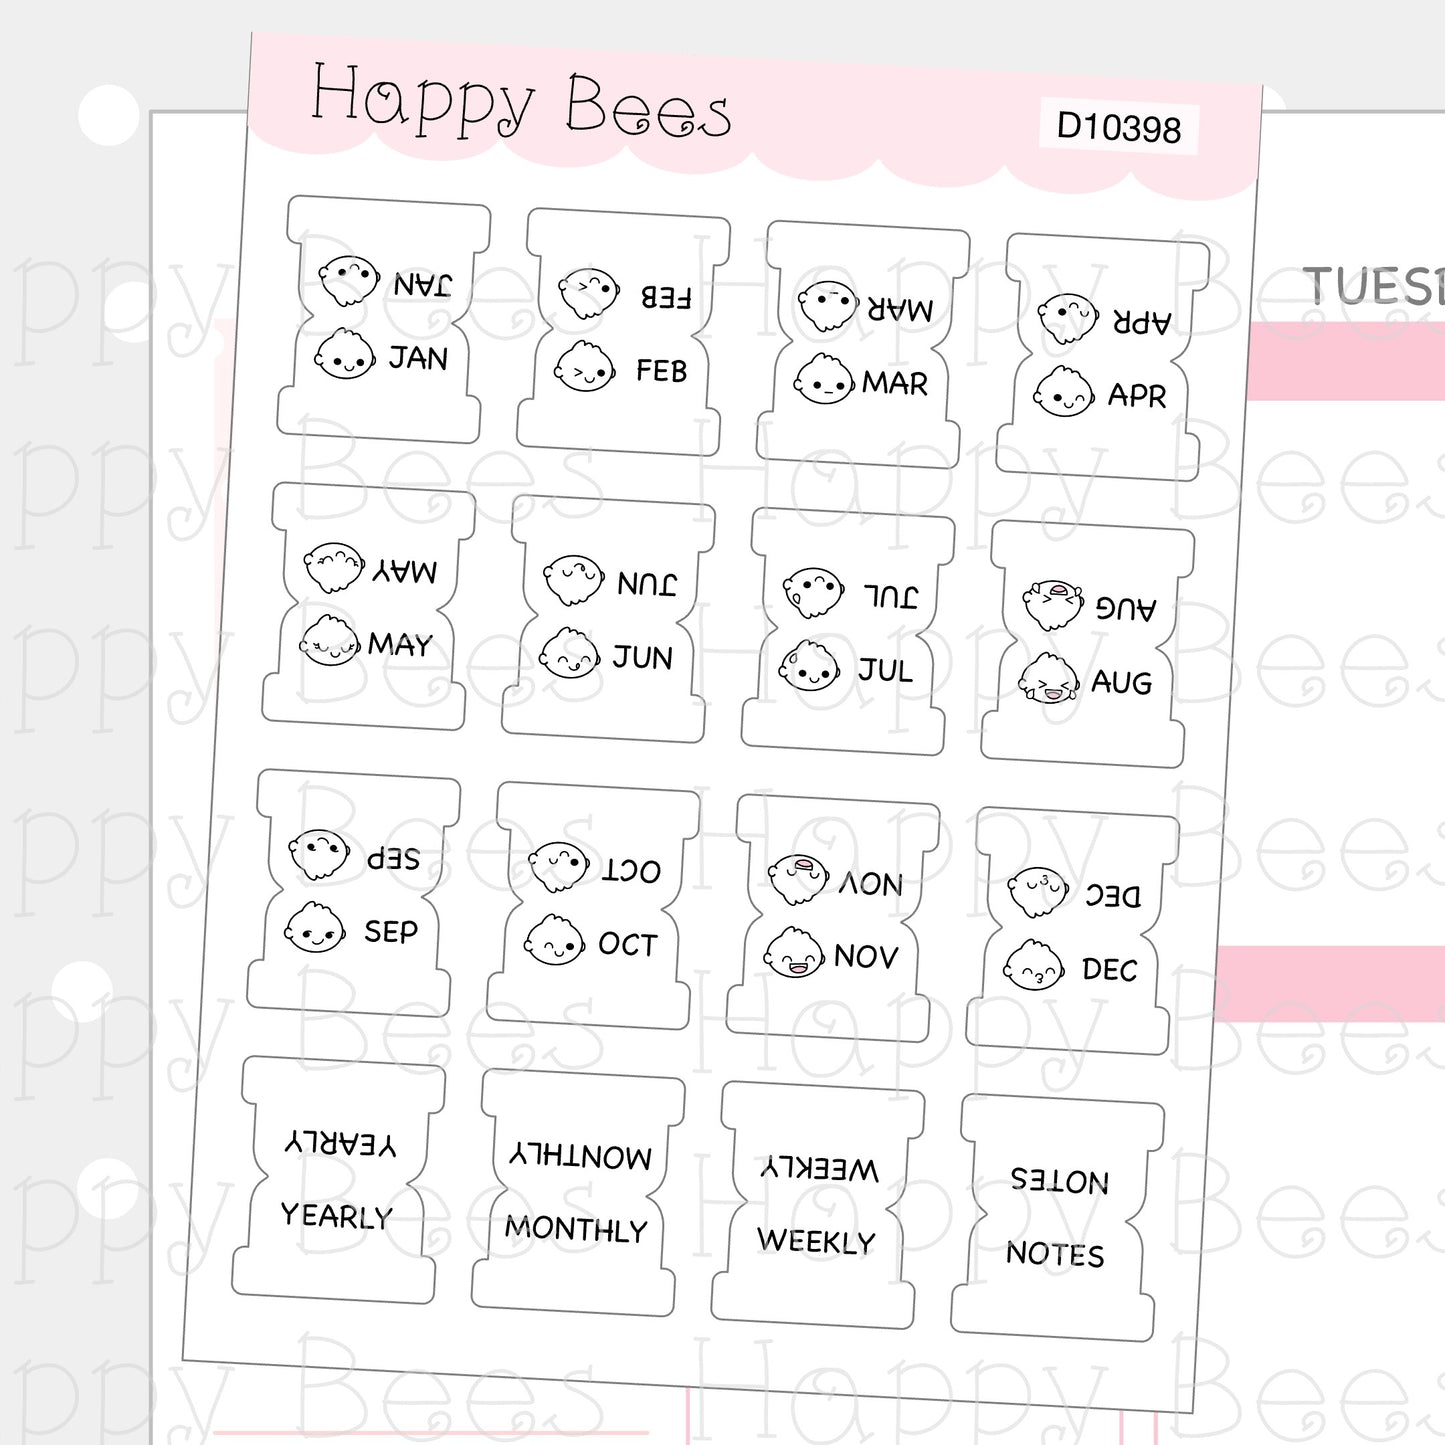 Mini Monthly Tabs Vol. 2 - Cute Functional Doodles Planner Stickers D10398